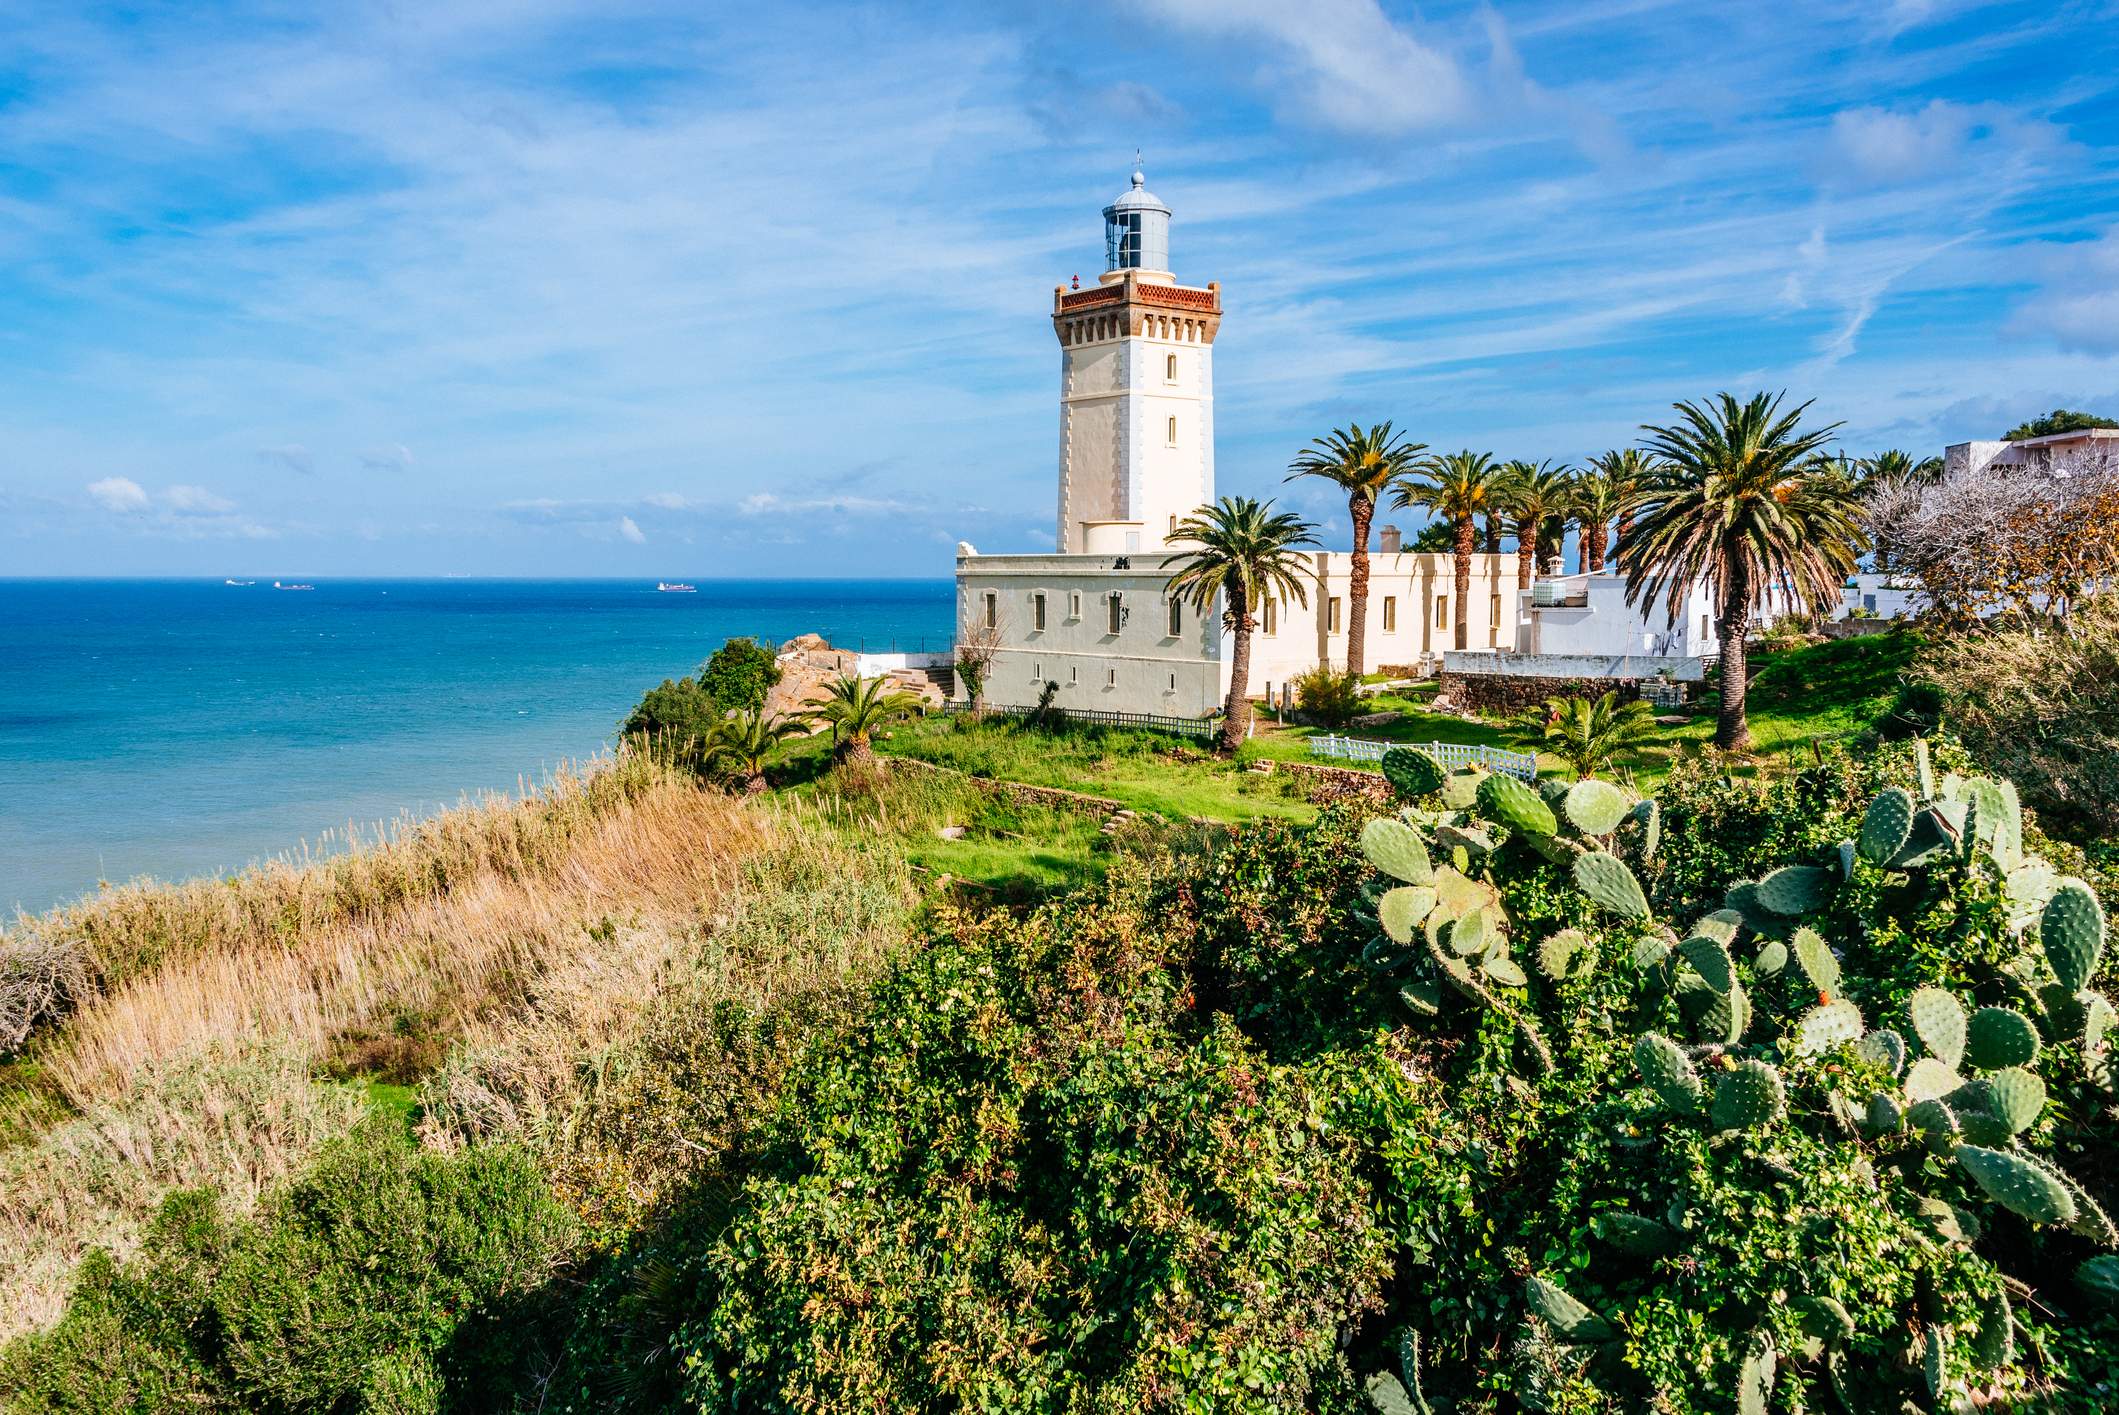 Cap spartel lies about 14km west from Tangier, with his lighthouse (Closed) it is a famous place where the mediterranean and atlantic sea join. It is the northwestern extremity of the African Atlantic coast.
